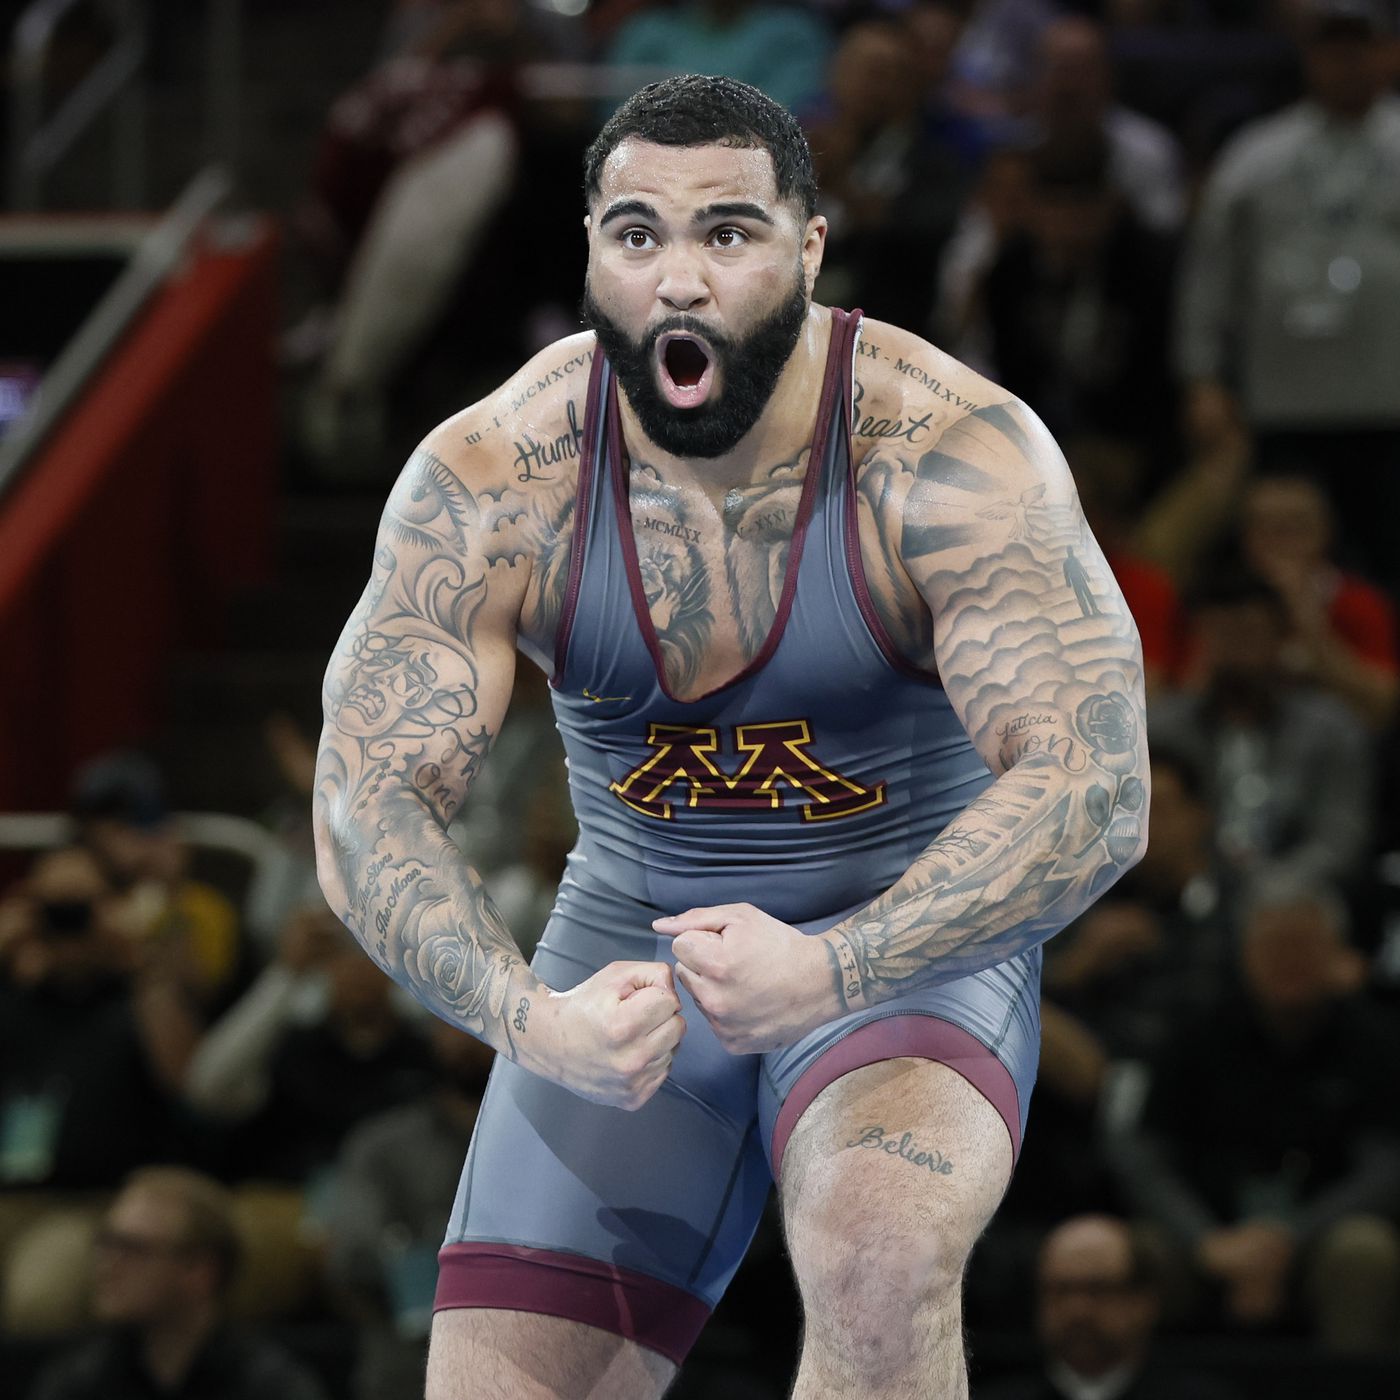 Gable Steveson retires from wrestling after winning second NCAA title as he moves onto WWE